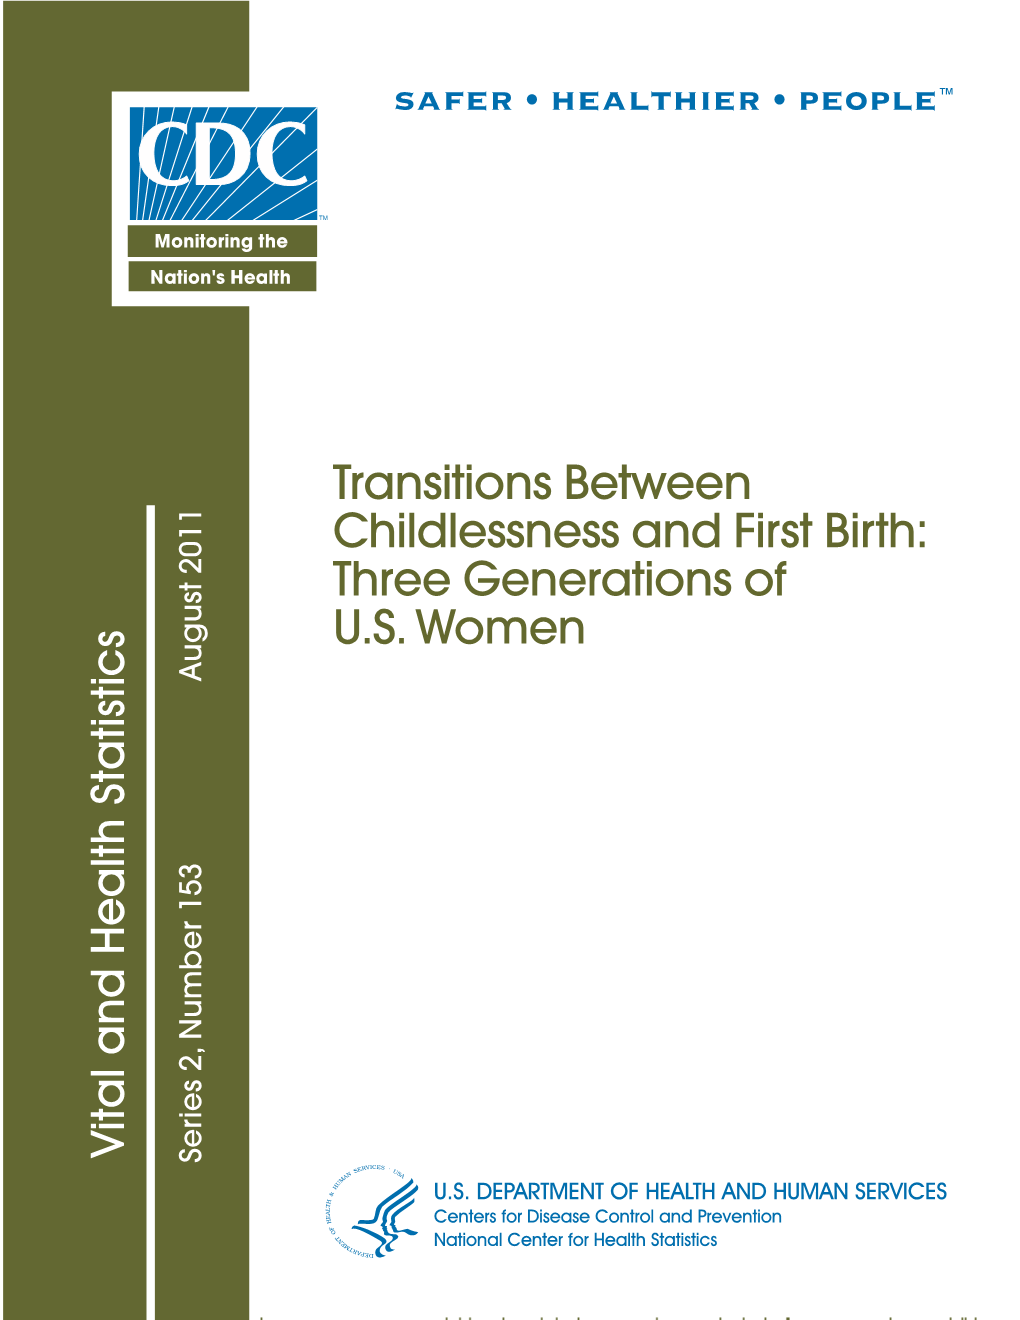 Transitions Between Childlessness and First Birth: Three Generations of U.S